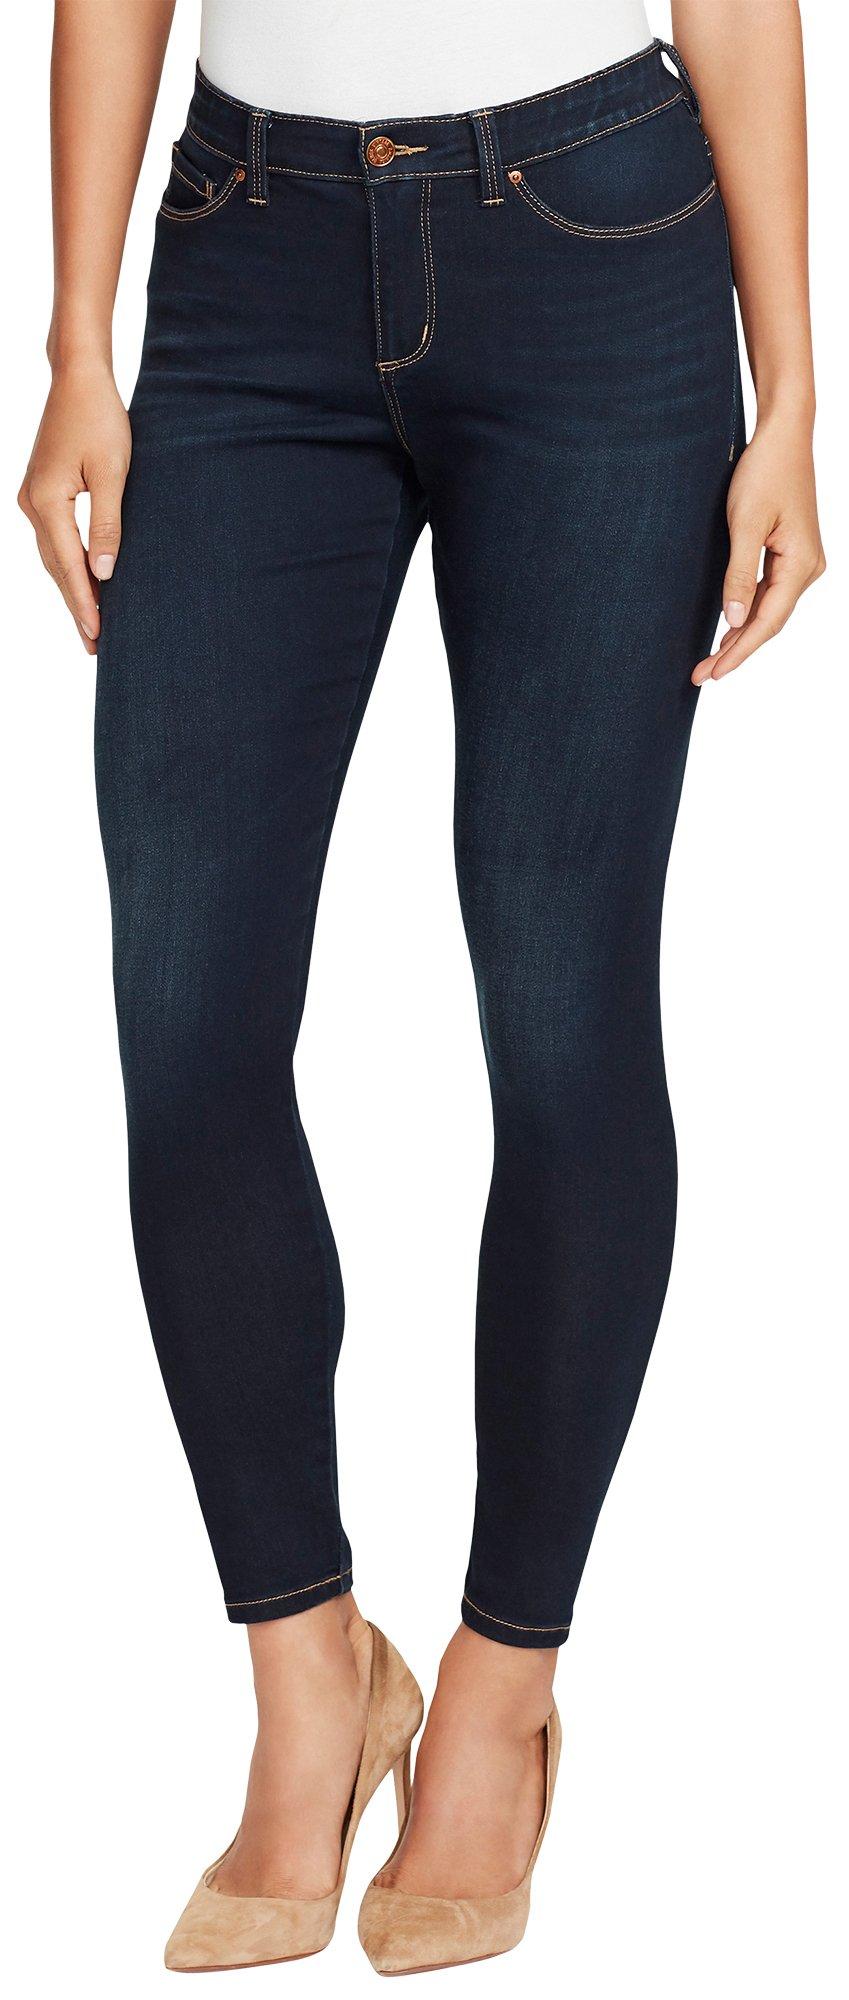 Jeans for Women | Skinny, Ankle, Bootcut, Straight Styles | Bealls Florida